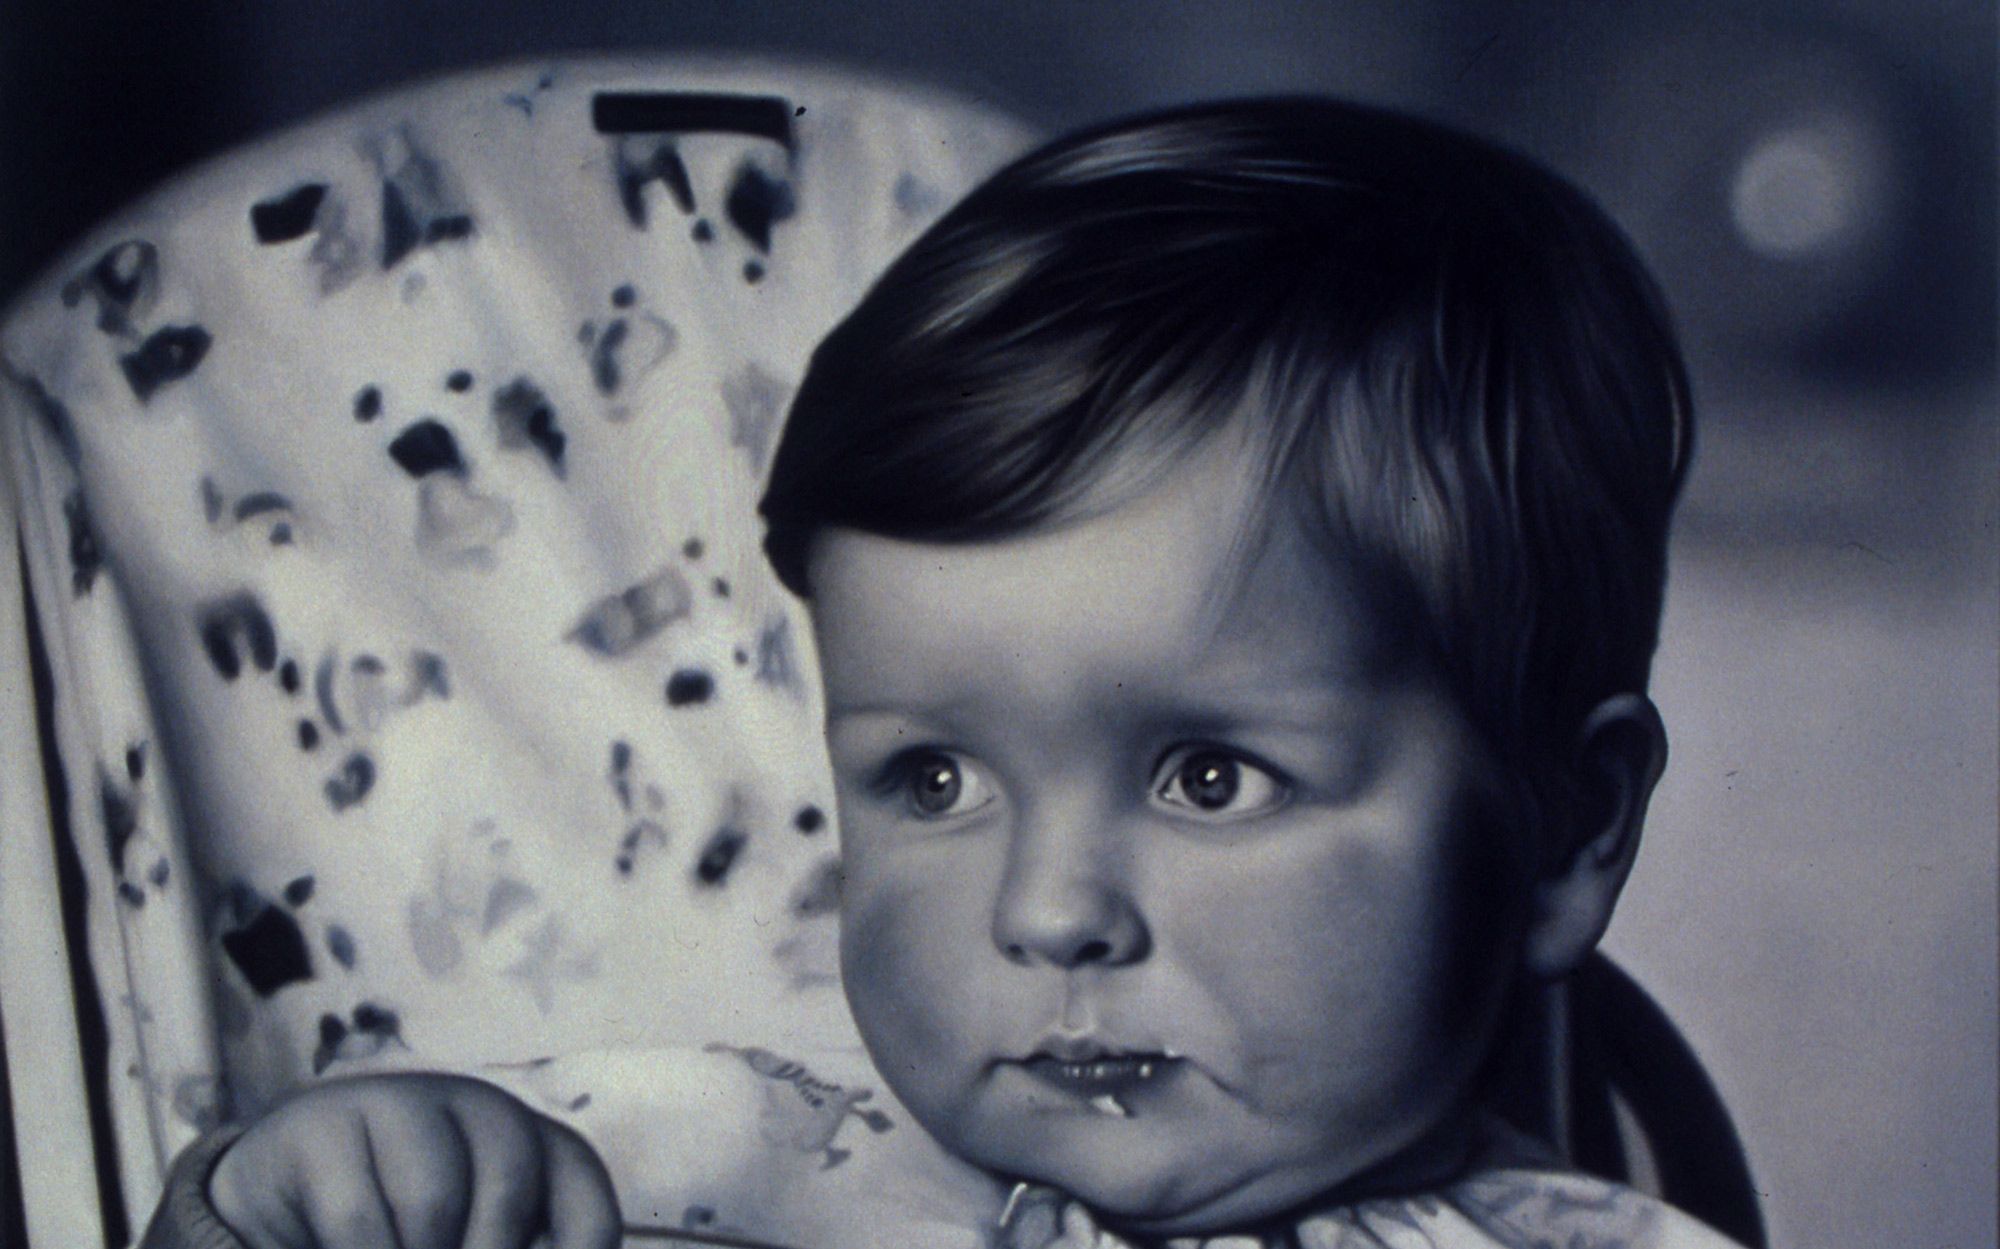 Photo realistic Self portrait of artist Mark Alexander at six months eating with spoon.